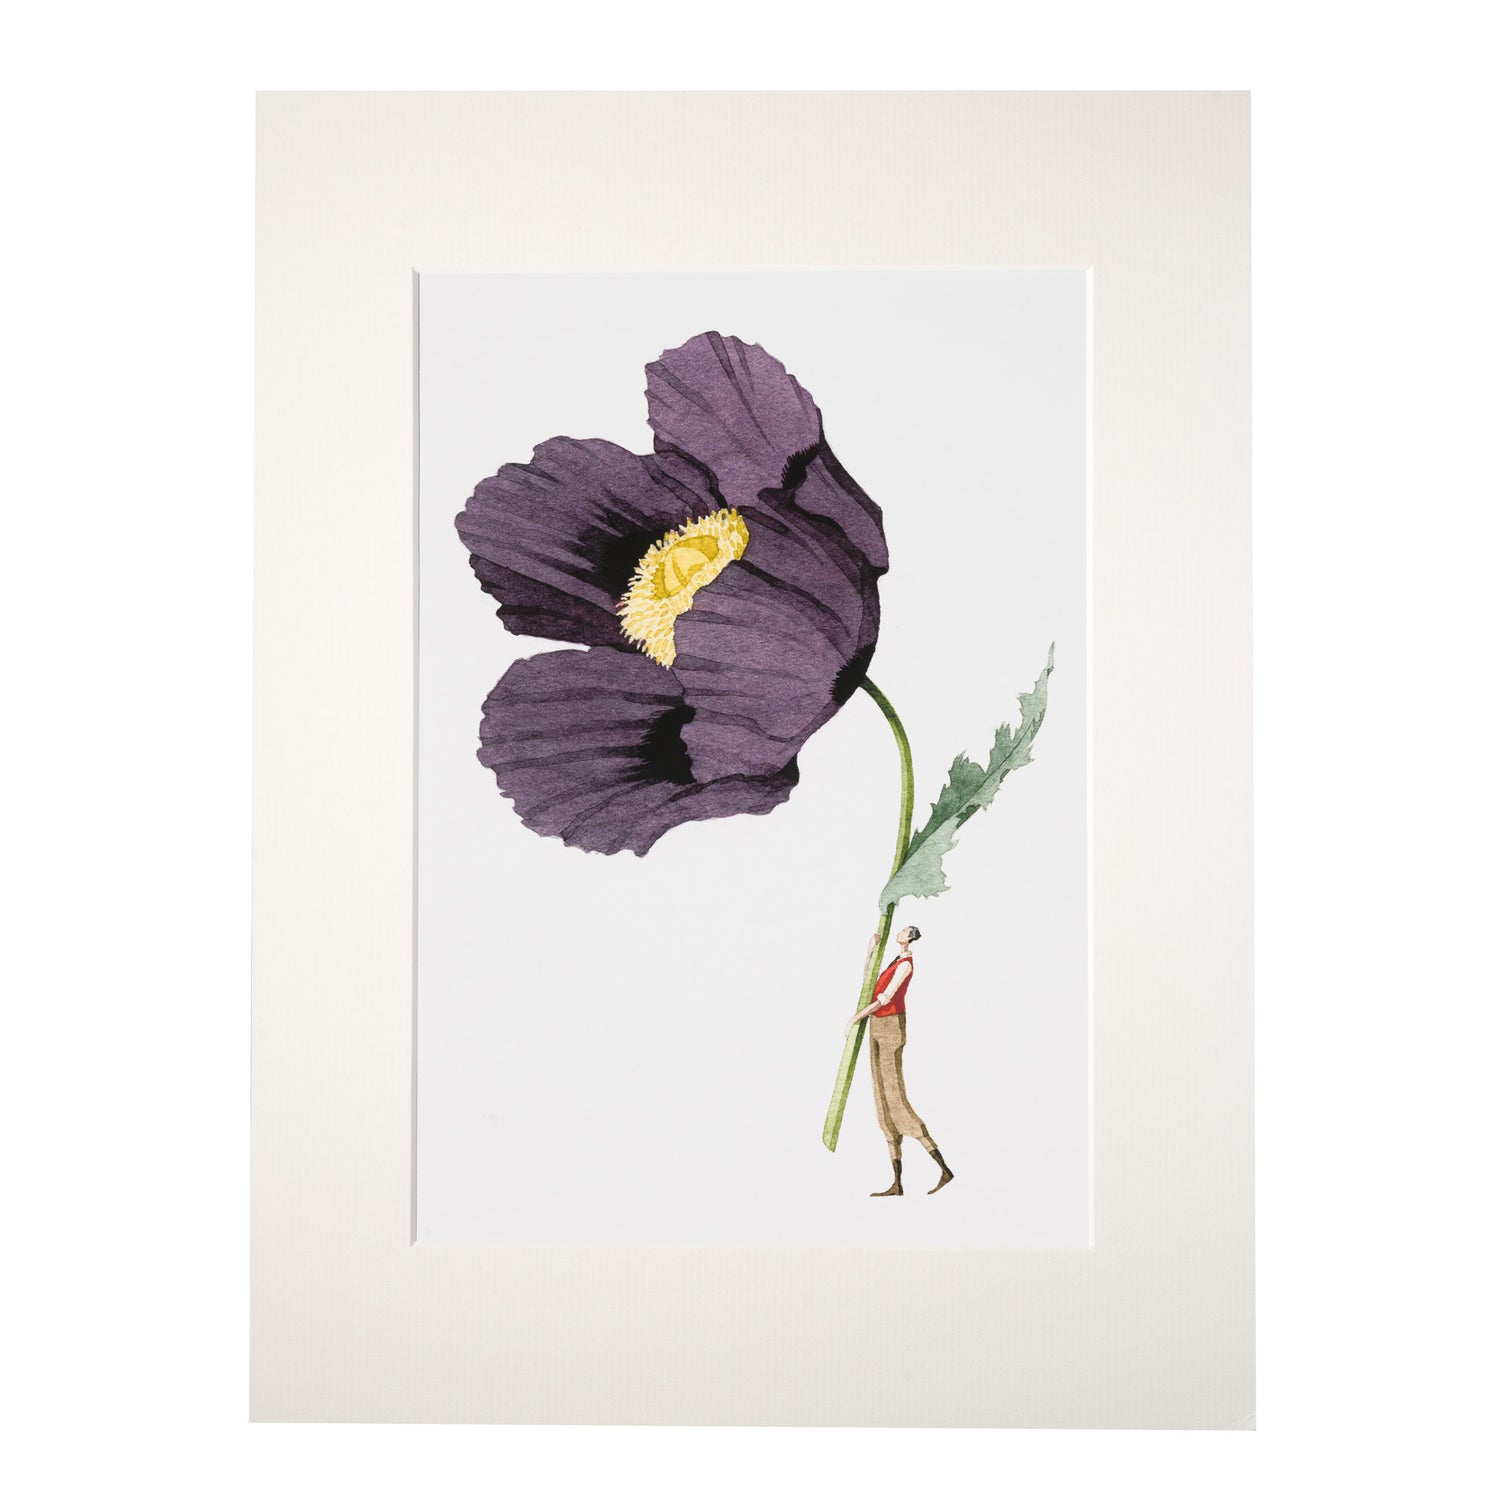 giclee print, mounted print, print, poppy, illustration, made in england, flowers, archival paper, art print